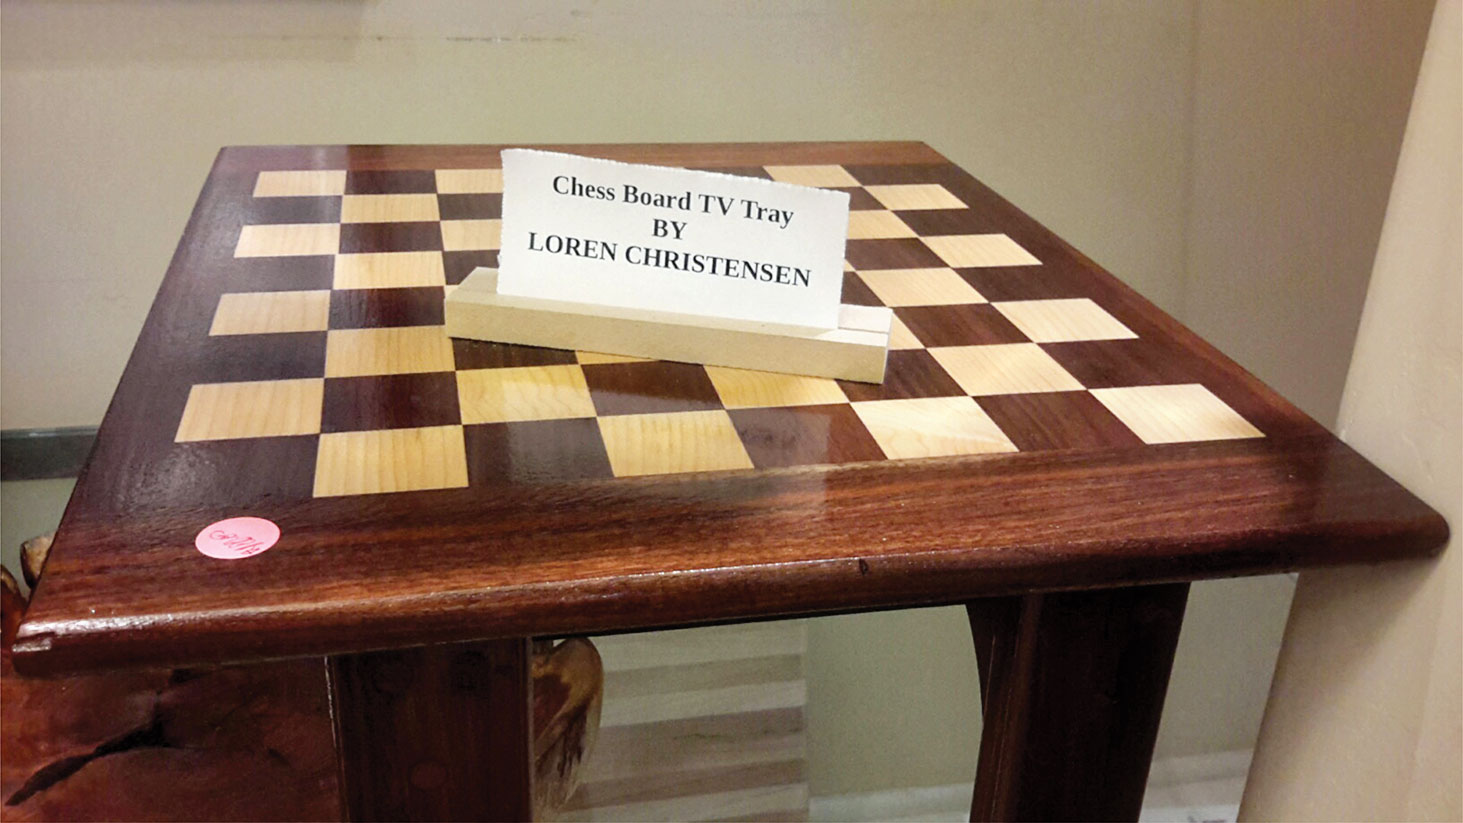 Available at the Craft Fair, a chess table